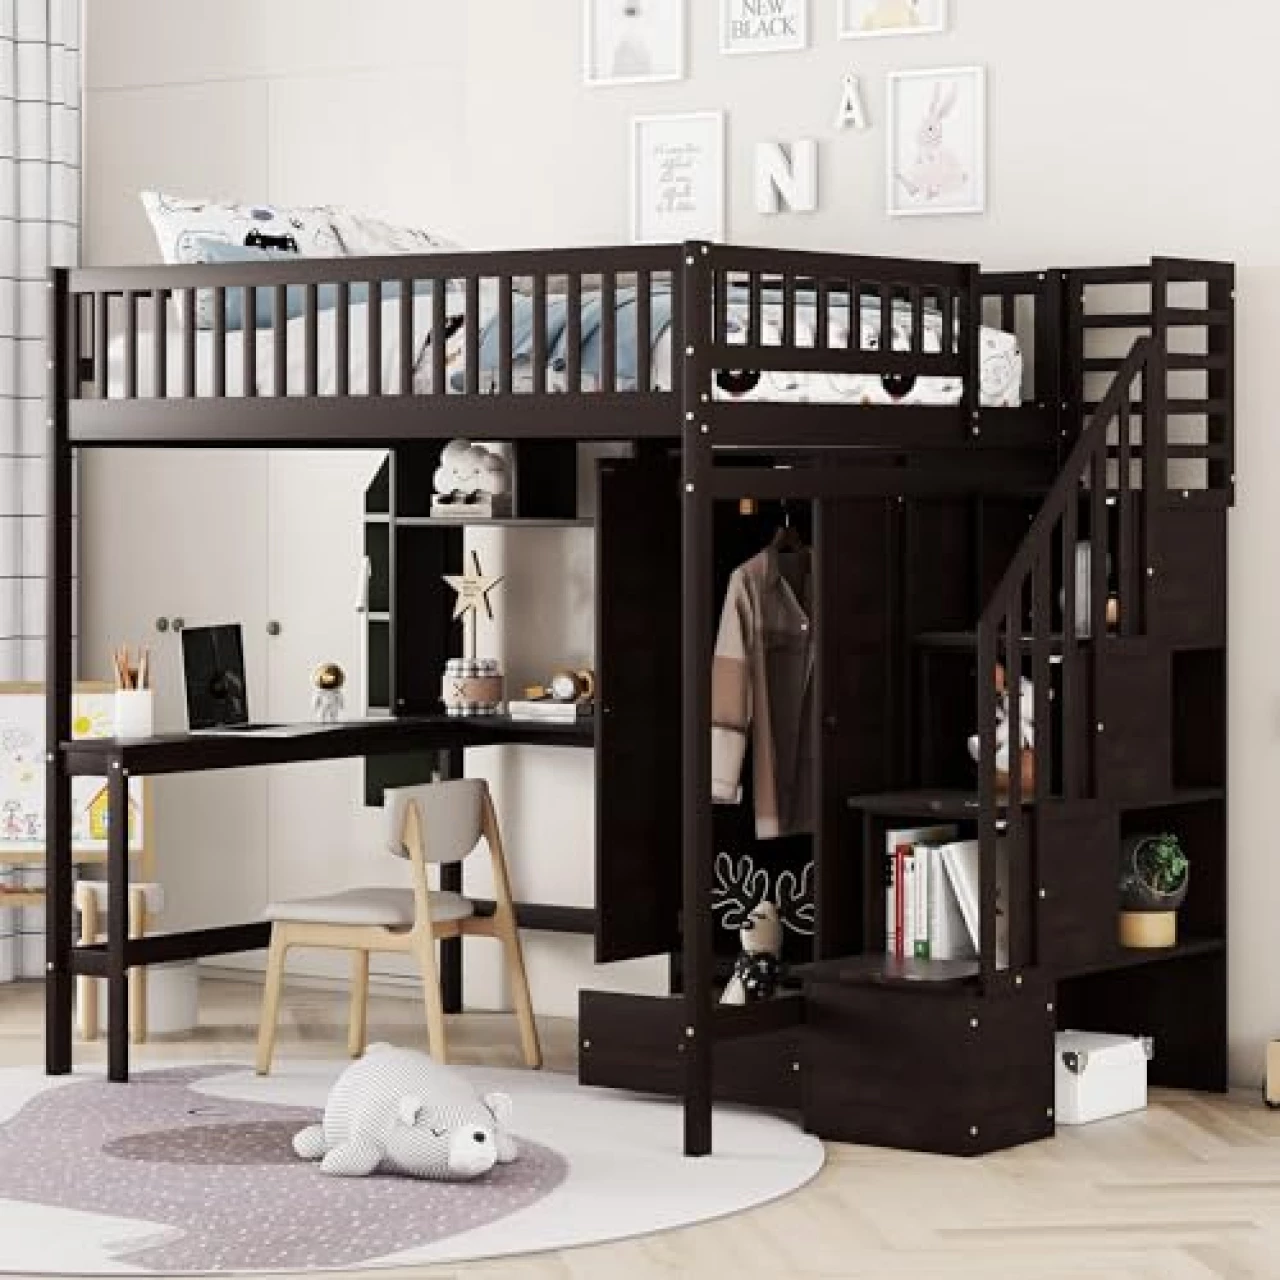 Merax Full Size Loft Beds Stairway Loft Bed Frame with Wardrobe, Desk, Bookcase and Drawers, Espresso